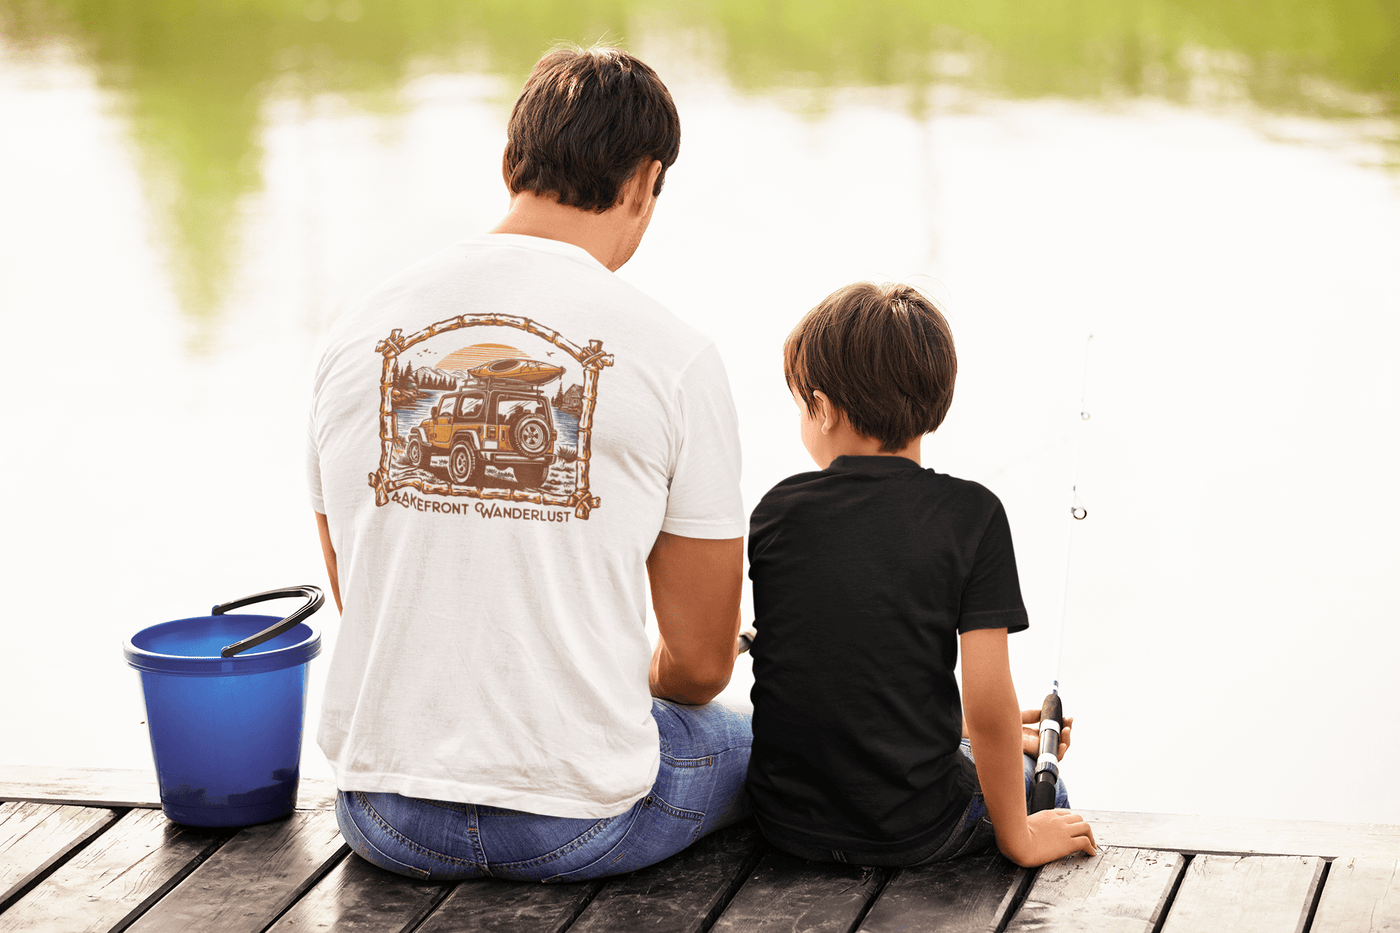 Lake Life 4x4 Graphic Tee - Goats Trail Off-Road Apparel Company